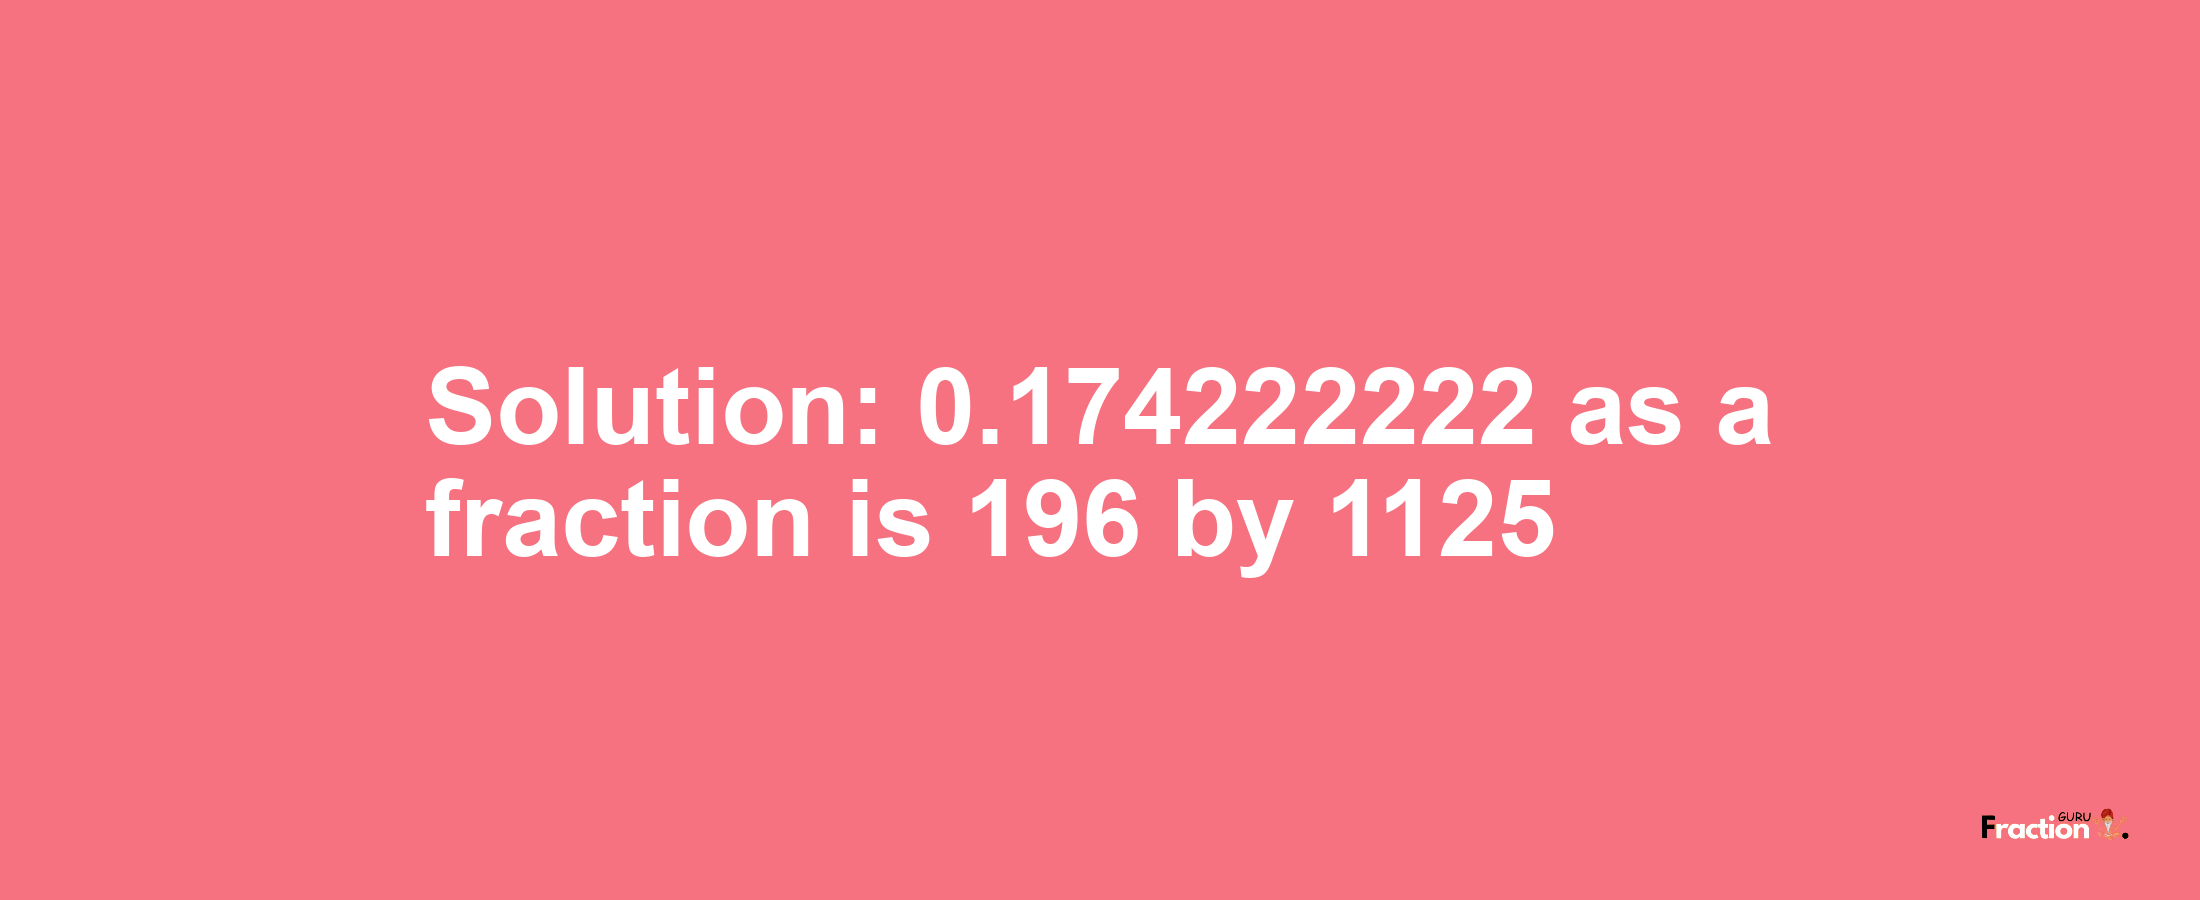 Solution:0.174222222 as a fraction is 196/1125